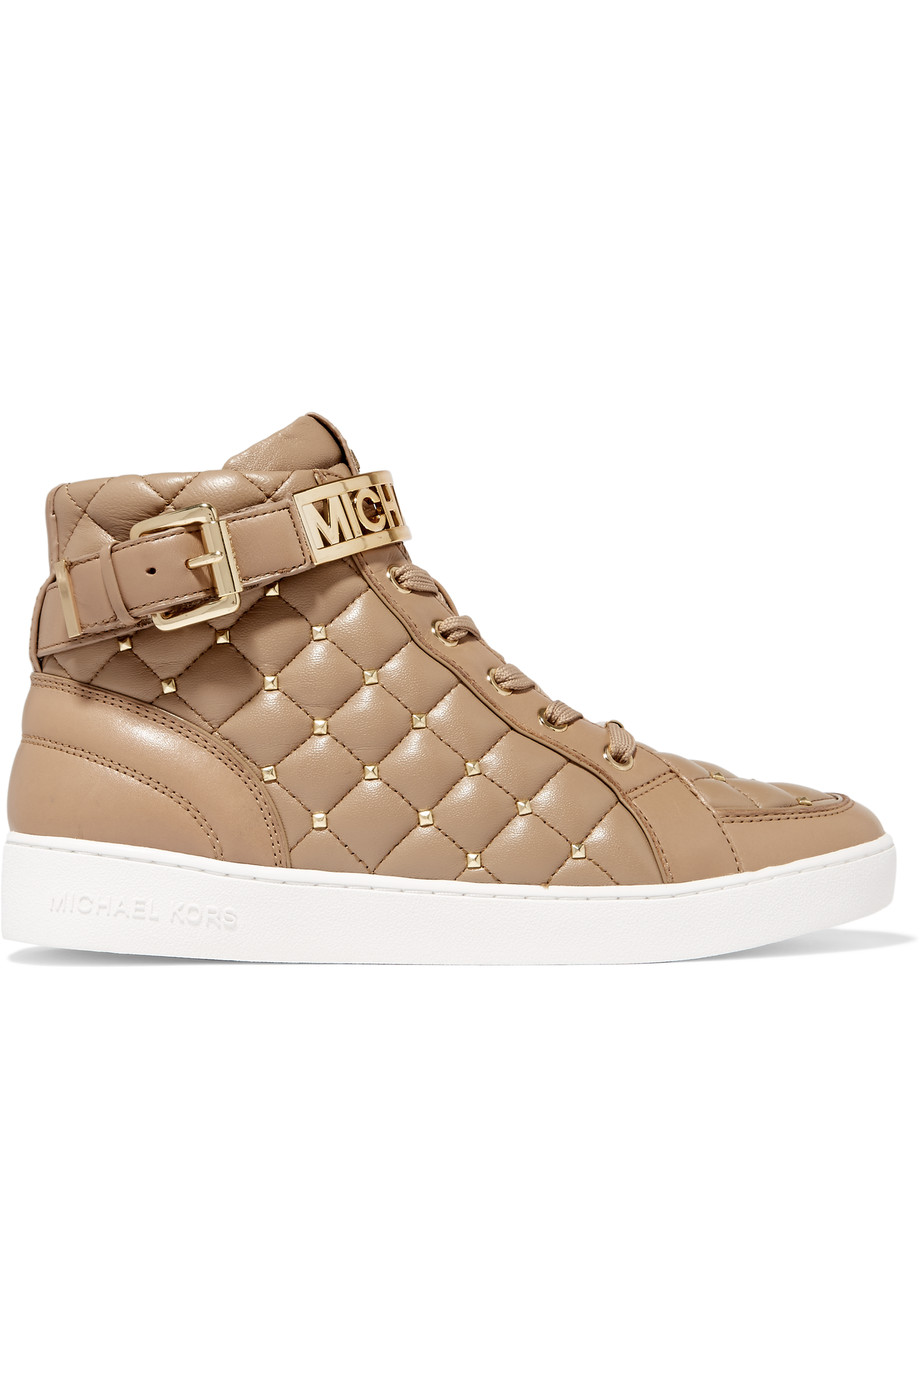 michael kors quilted sneakers